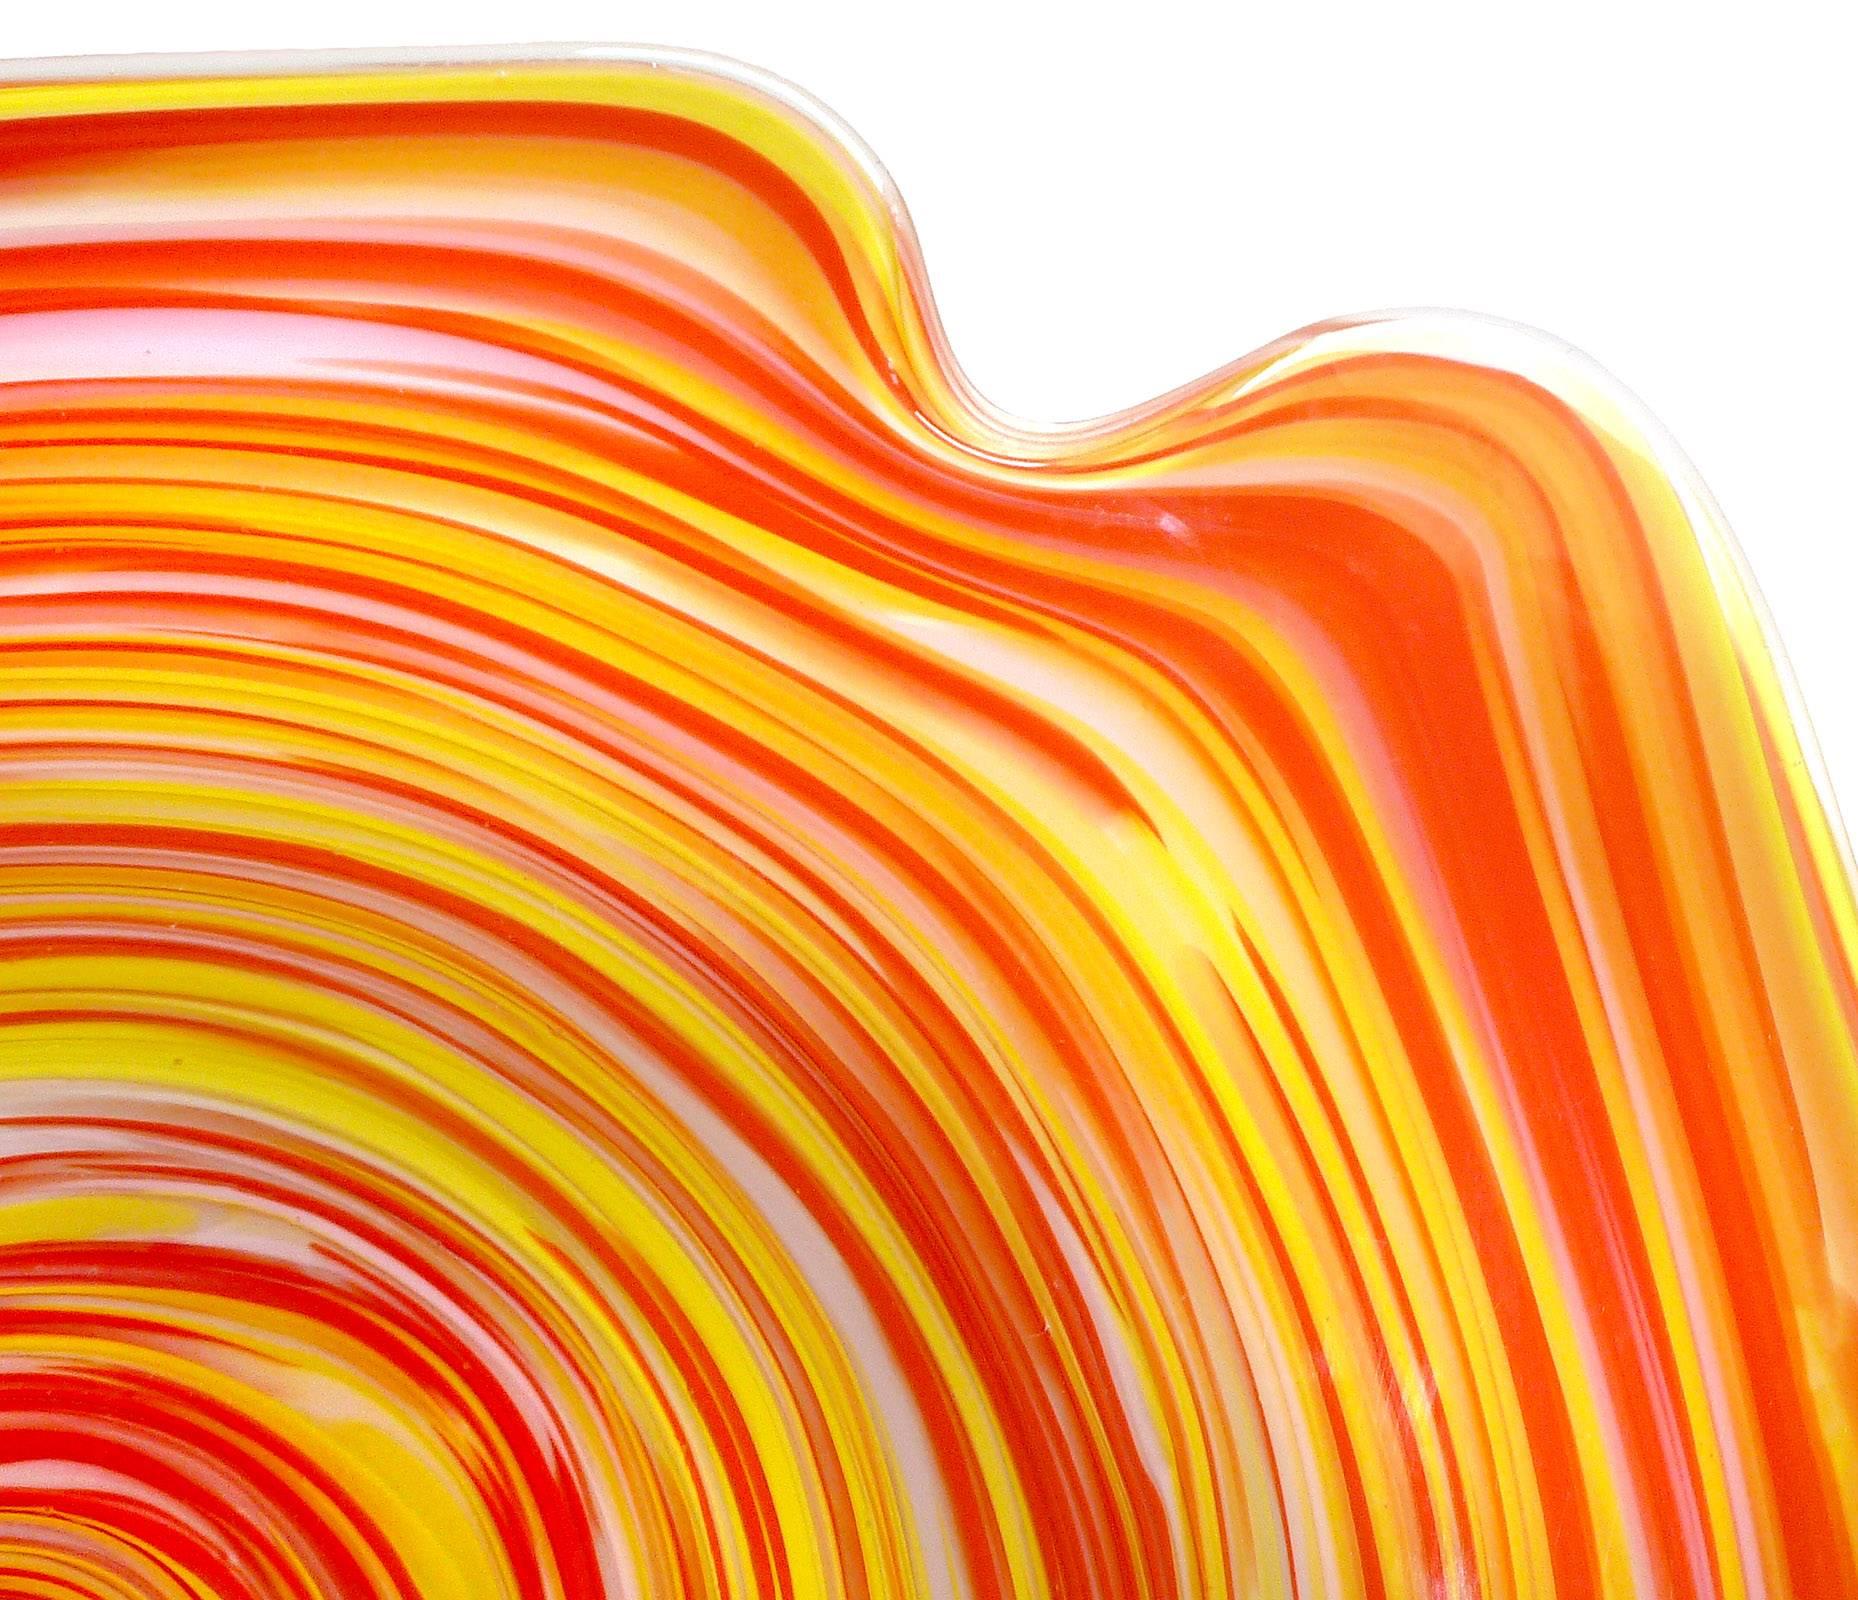 Free shipping worldwide! See details below description.

Bright and beautiful Murano opalescent white, yellow and orange optic swirl art glass centerpiece bowl. Documented to the Fratelli Toso company, in a striking Psychedelic design. It still